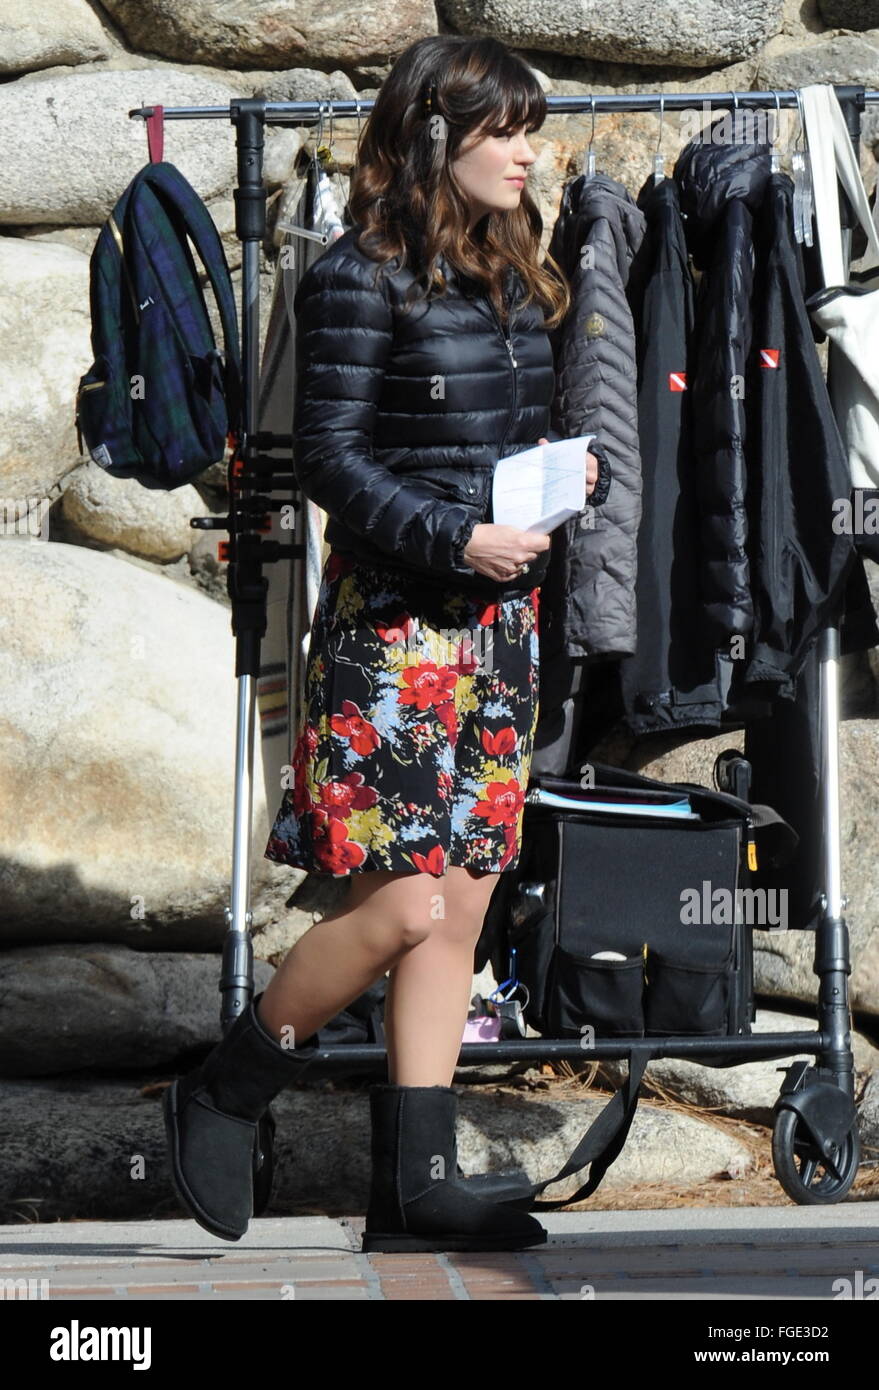 Zooey Deschanel back on set for "New Girl". The actress wears ugg boots and  a down jacket to her dress. Featuring: Zooey Deschanel Where: Pasadena,  California, United States When: 13 Jan 2016